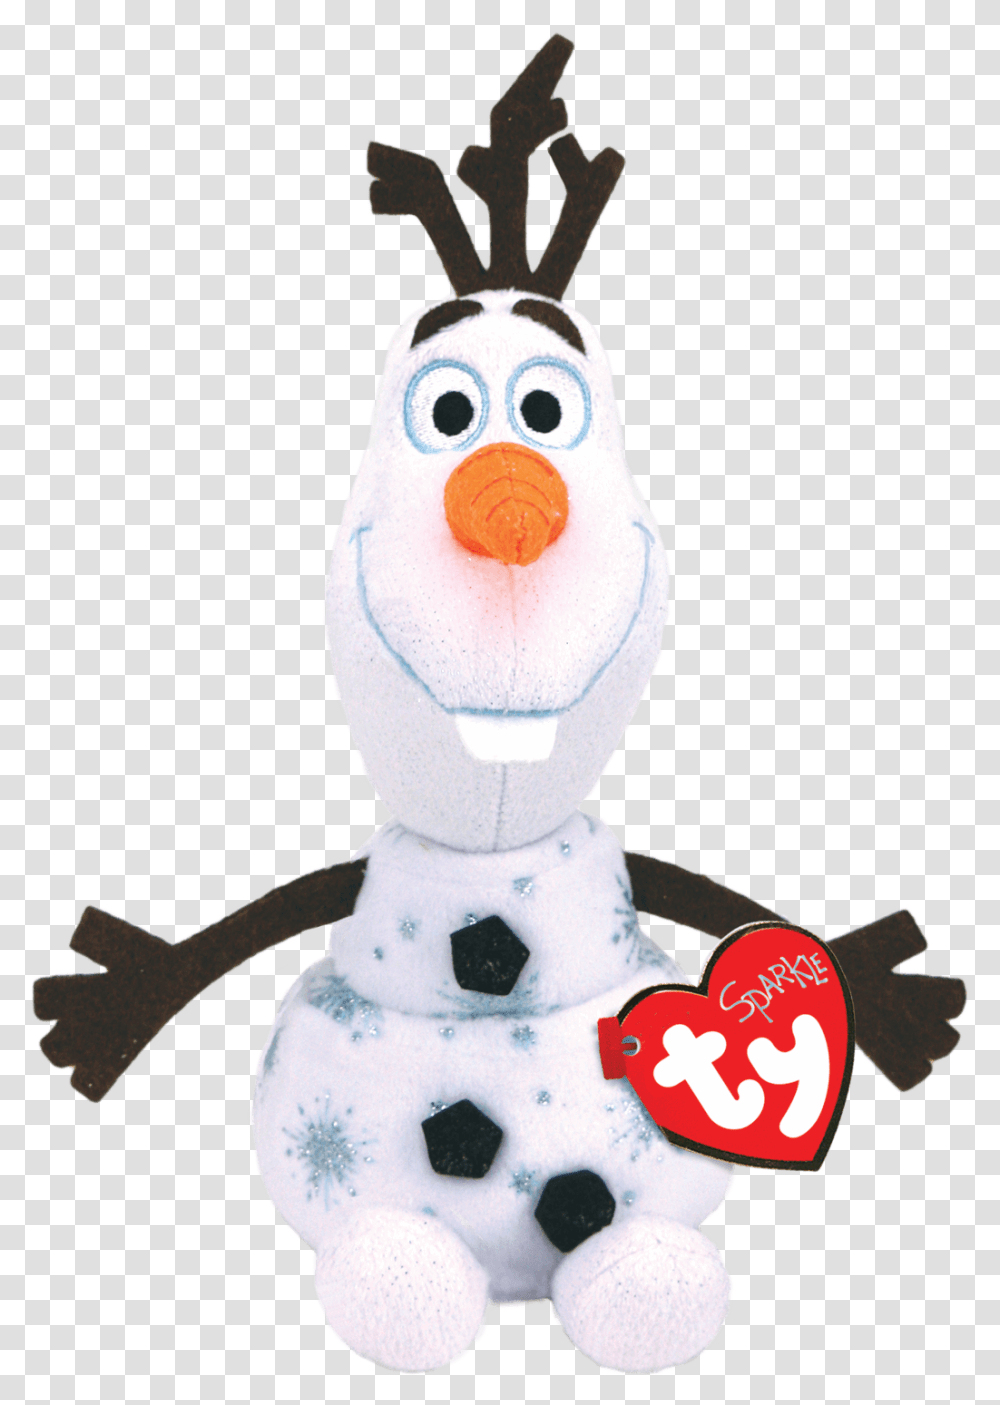 Ty Frozen Olaf Frozen 2 Snowman With Sound Reg Frozen 2 Ty Plush, Nature, Outdoors, Winter, Figurine Transparent Png